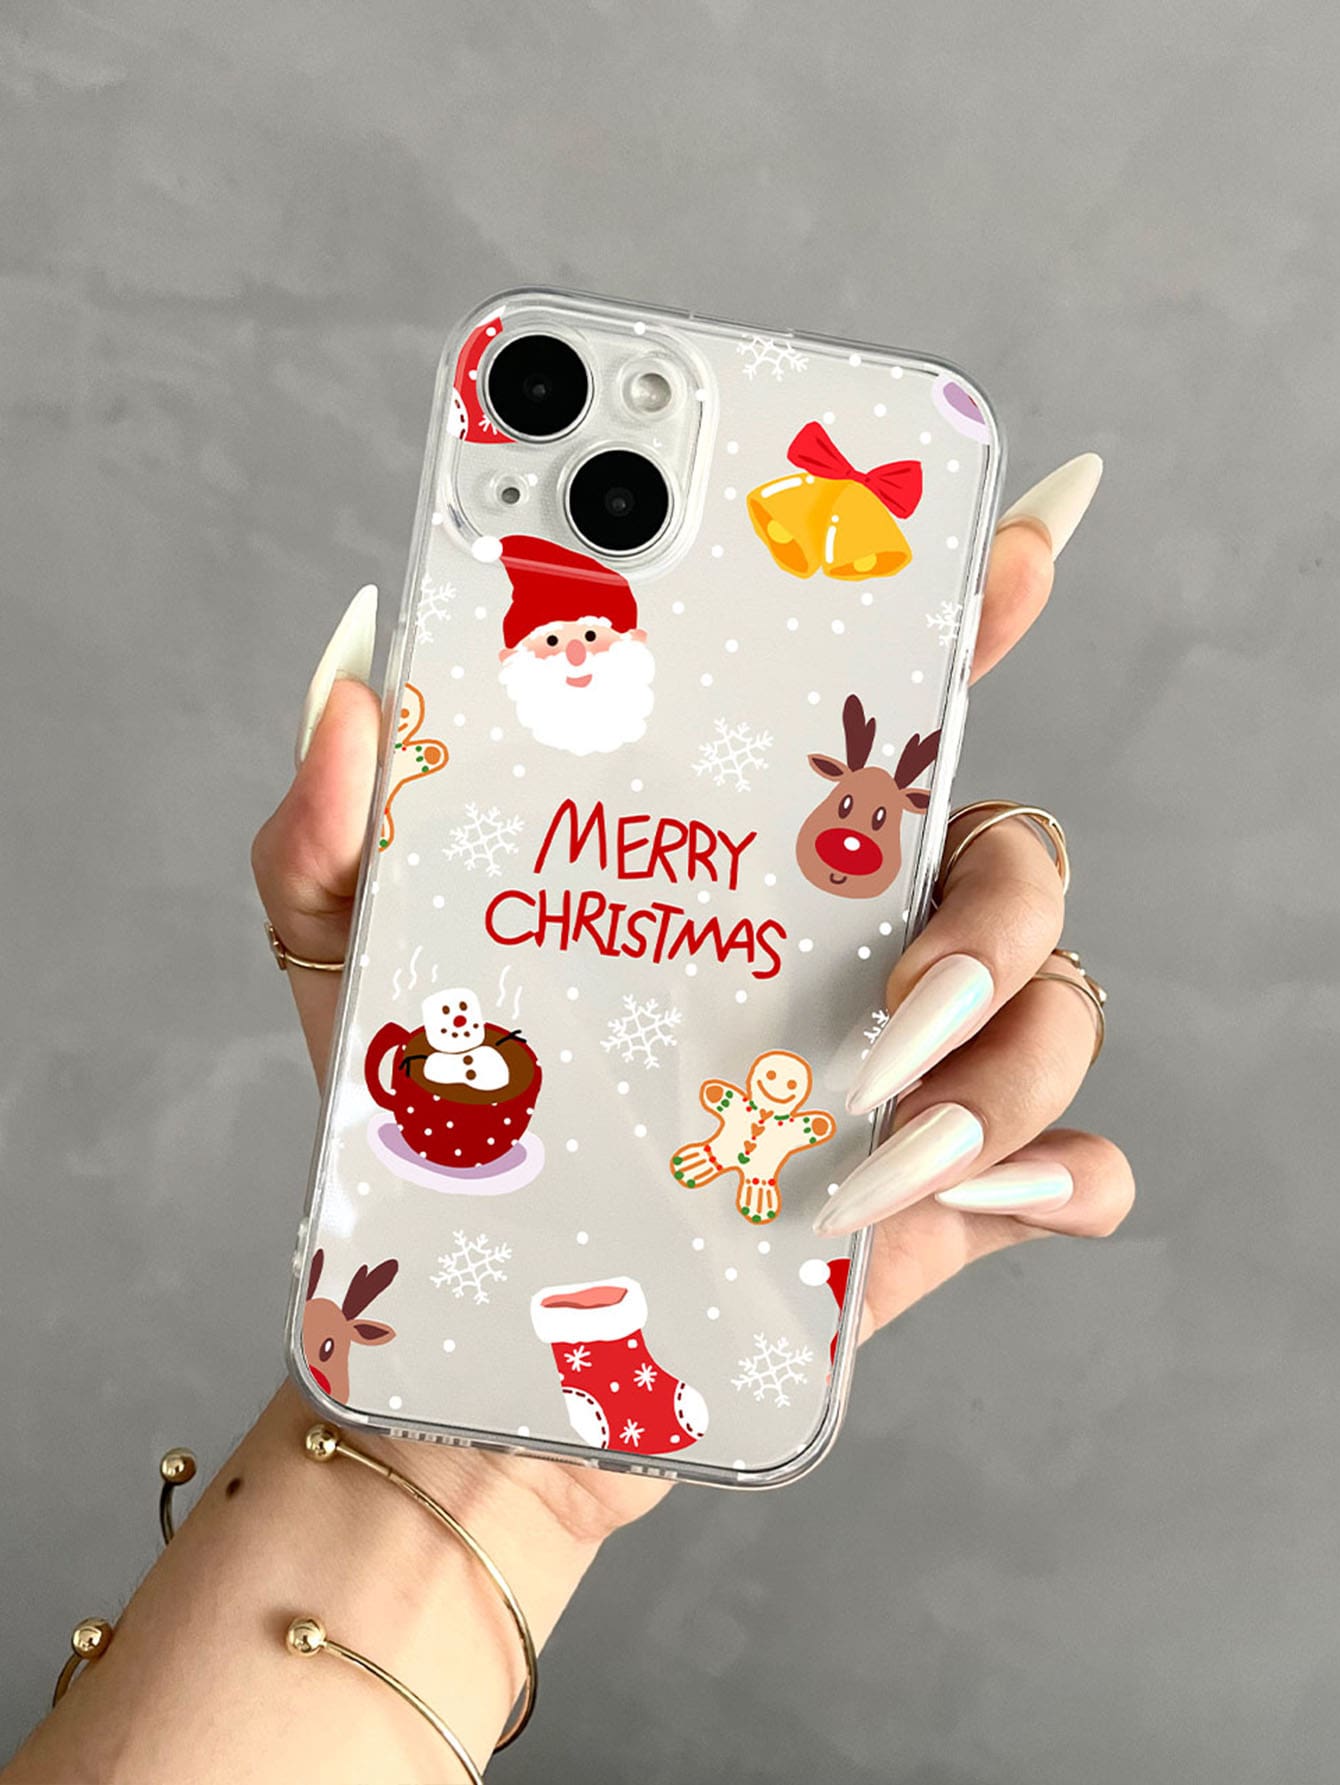 Christmas Cartoon Graphic Clear Silicon Case Cover